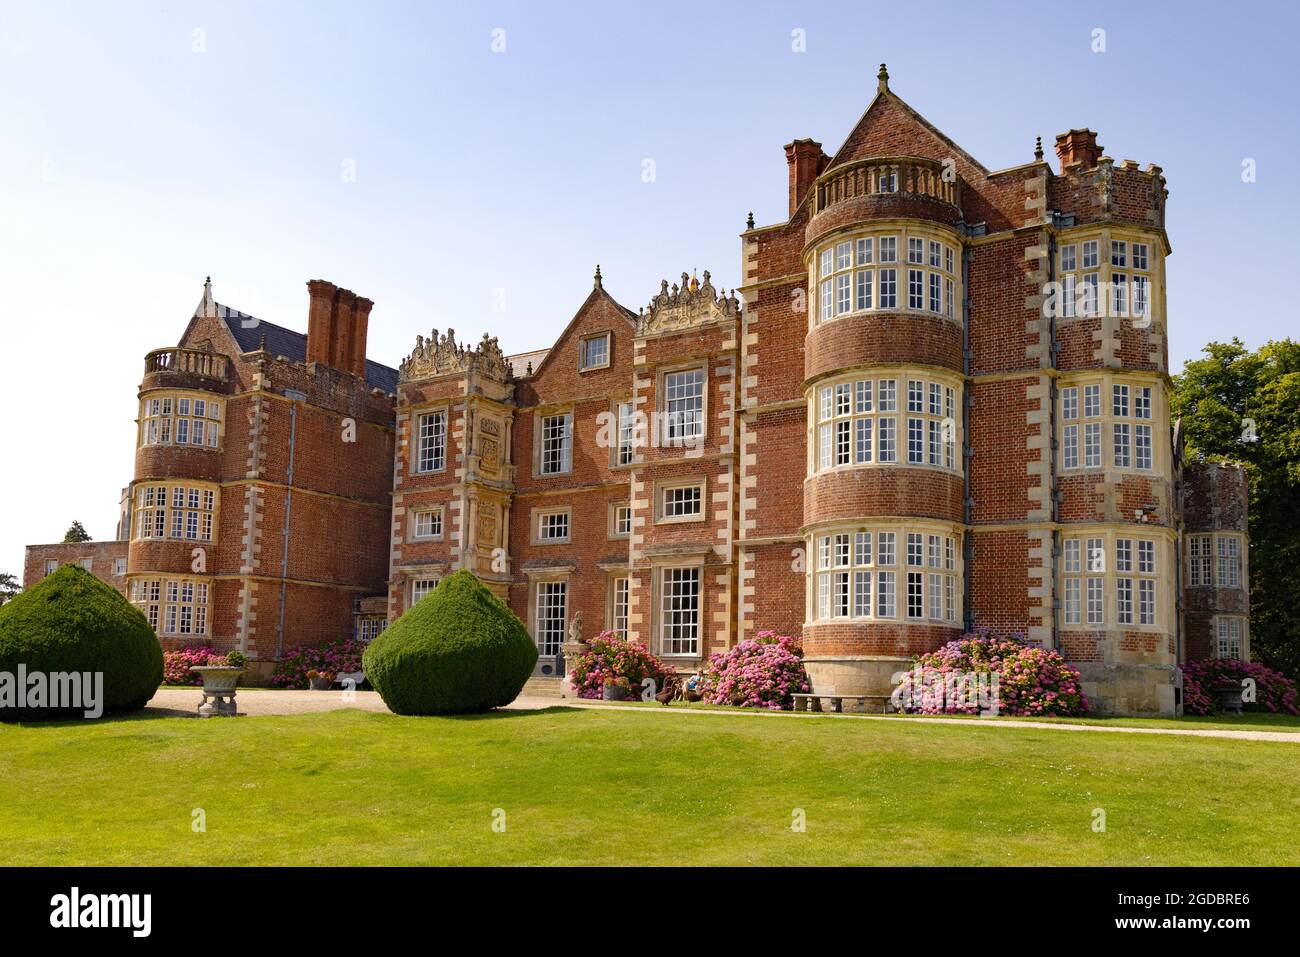 Burton Agnes Hall, a 17th century elizabethan manor house built in the 1600s, East Yorkshire England UK Stock Photo